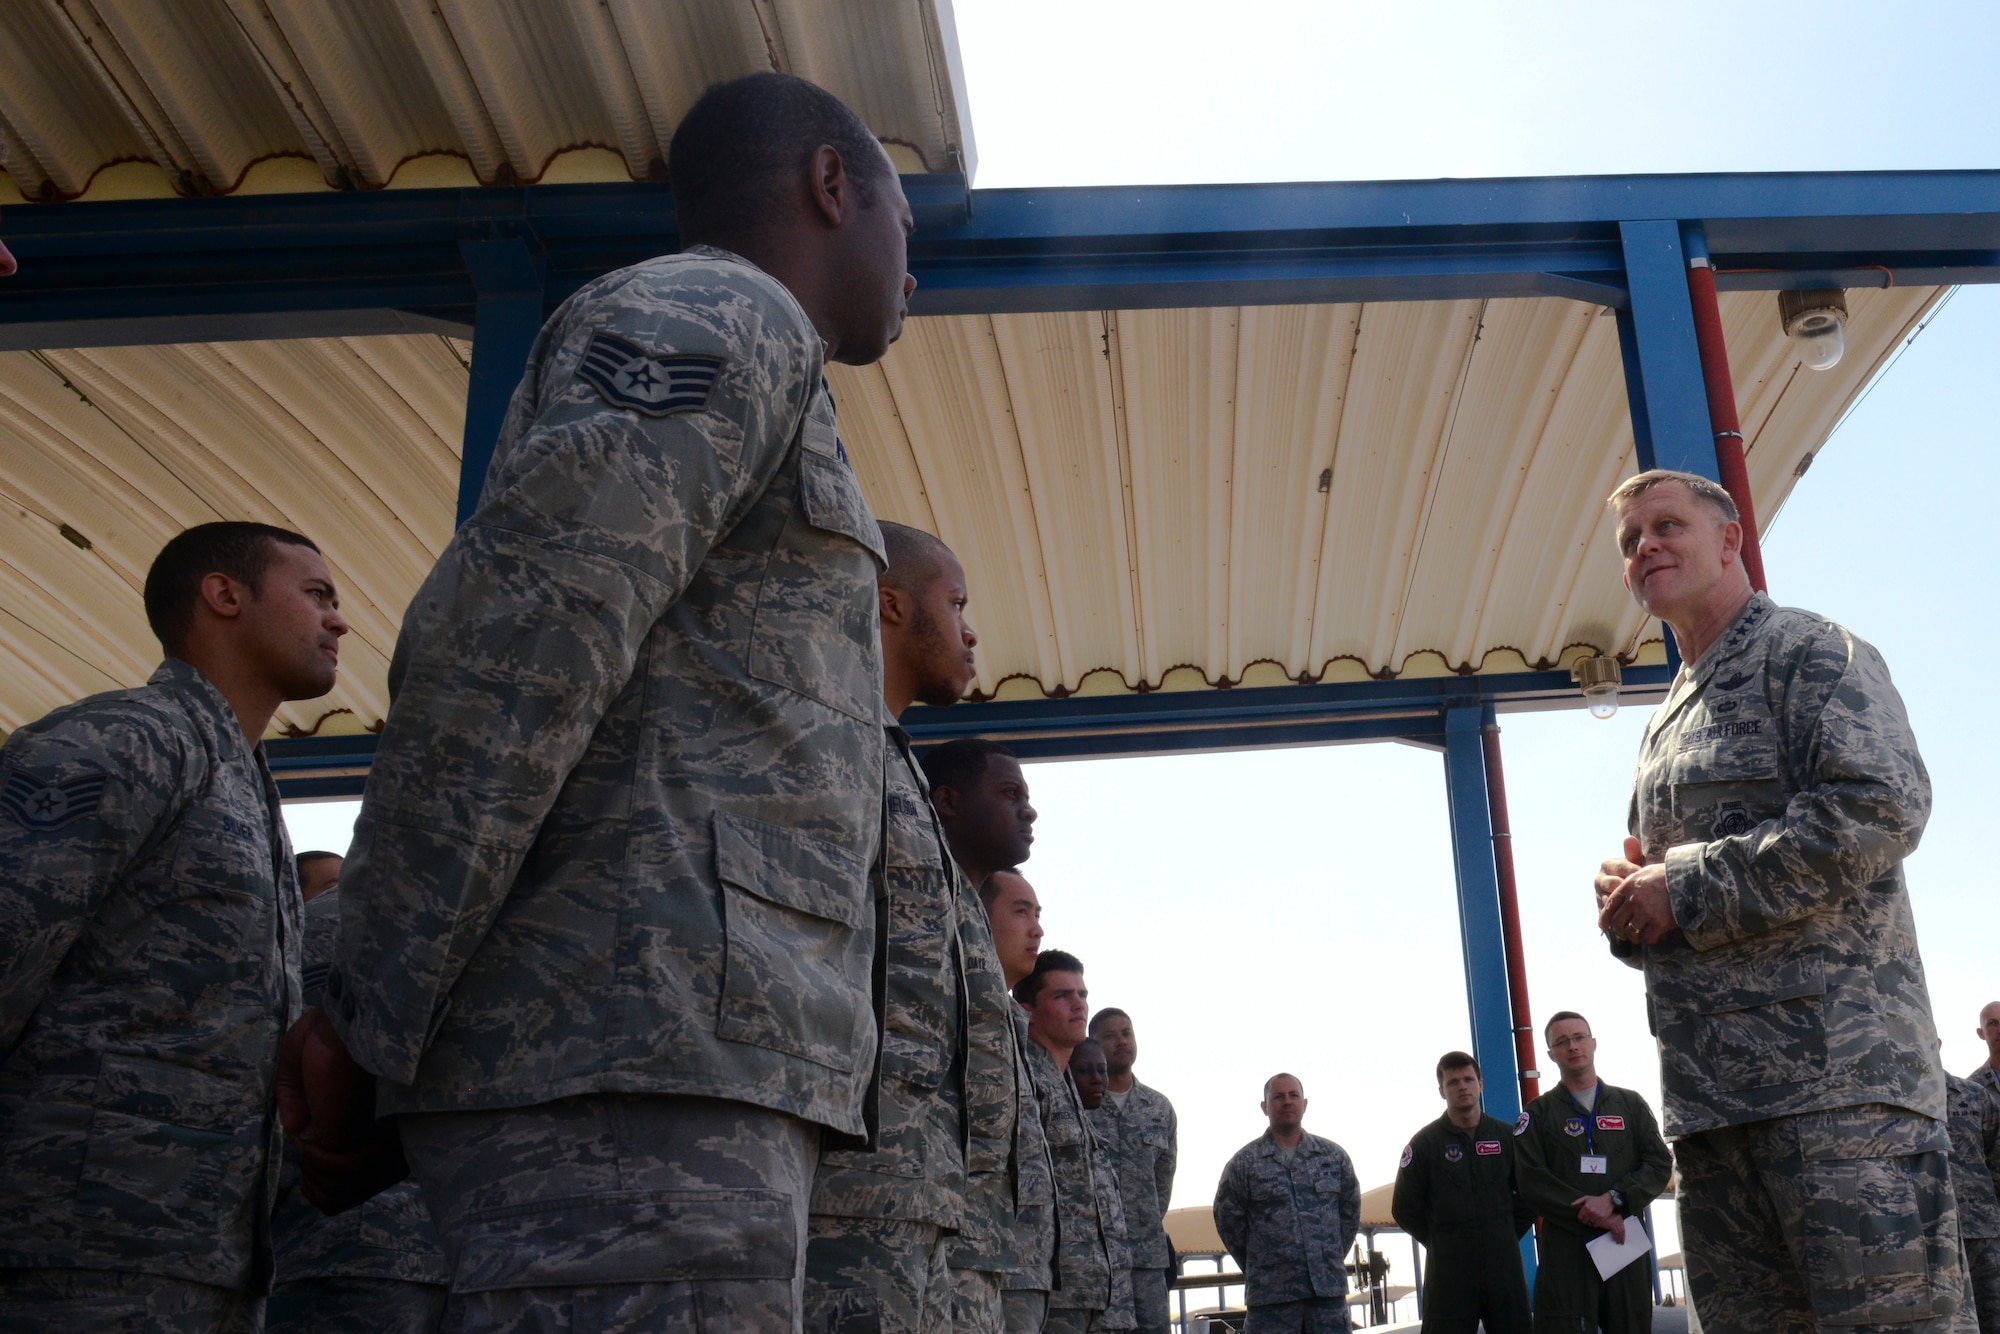 U.S. Air Force Gen. Frank Gorenc, United States Air Forces in Europe – Air Forces Africa commander, speaks with Airmen at Ben Guerir Air Base, Morocco, May 20, 2015. Gorenc talked about continued innovation and building partnerships with allies. The Airmen are part of Exercise African Lion. African Lion is the largest Department of Defense exercise in Africa and this marks the first year the U.S. Air Force has participated. (U.S, Air Force photo by Staff Sgt. Eboni Reams/Released)